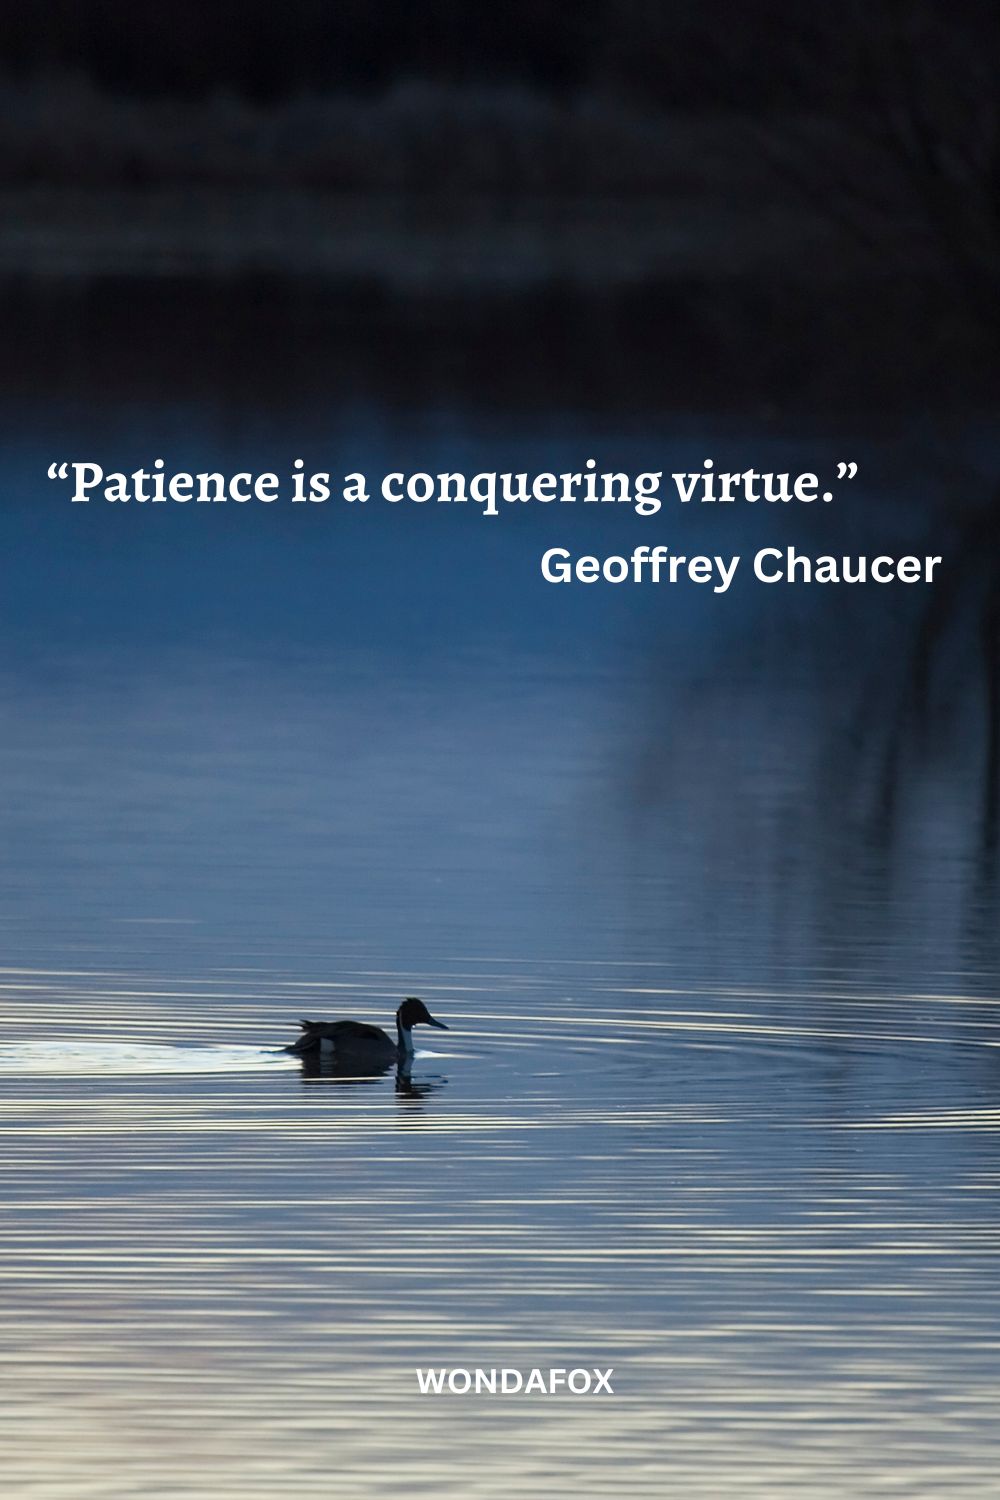 “Patience is a conquering virtue.”
Geoffrey Chaucer